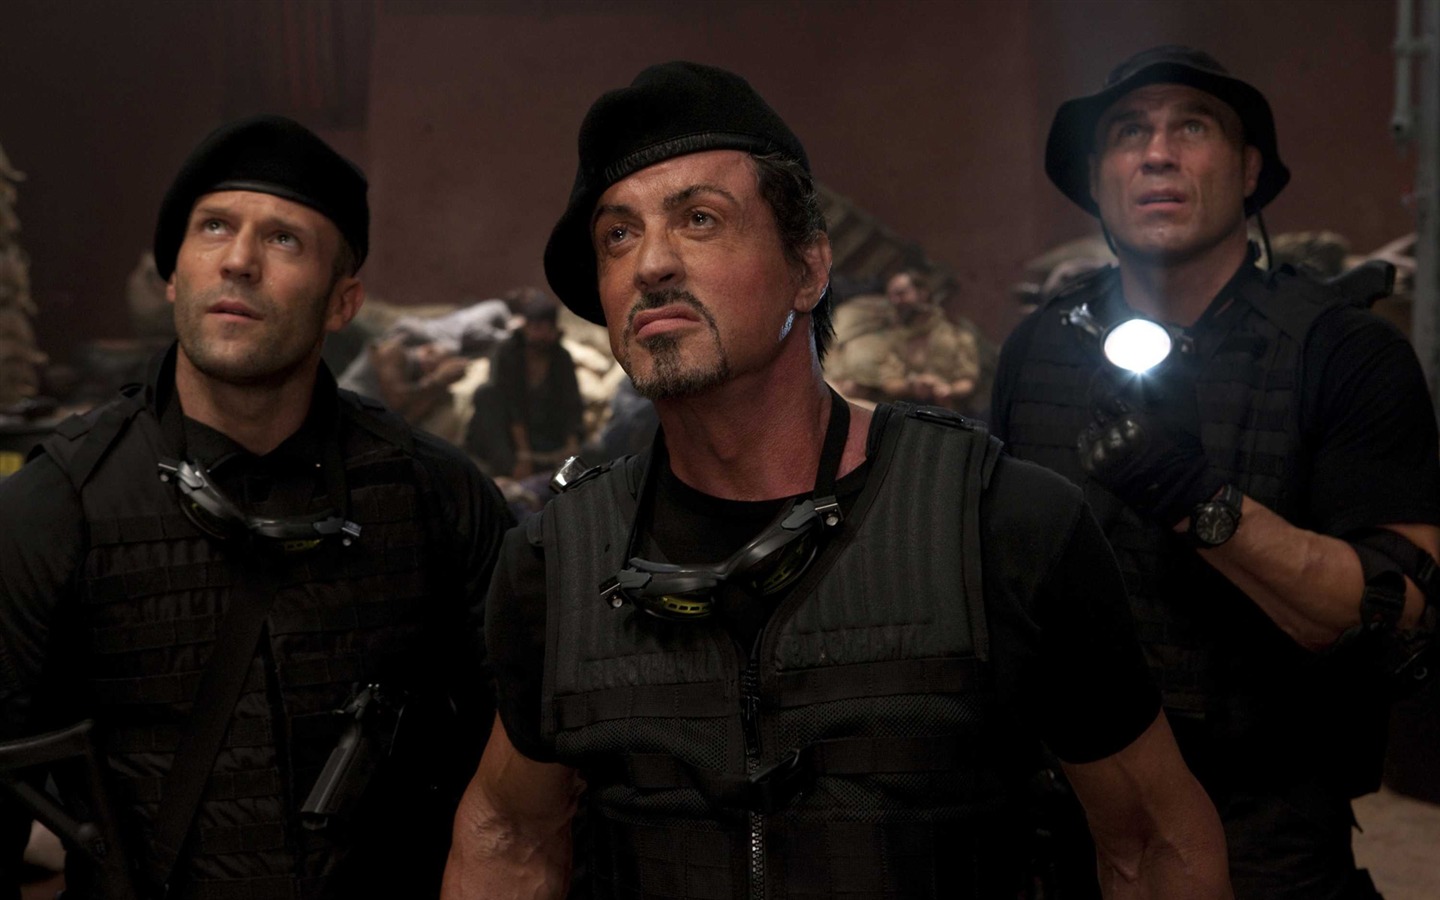 The Expendables HD Wallpaper #5 - 1440x900